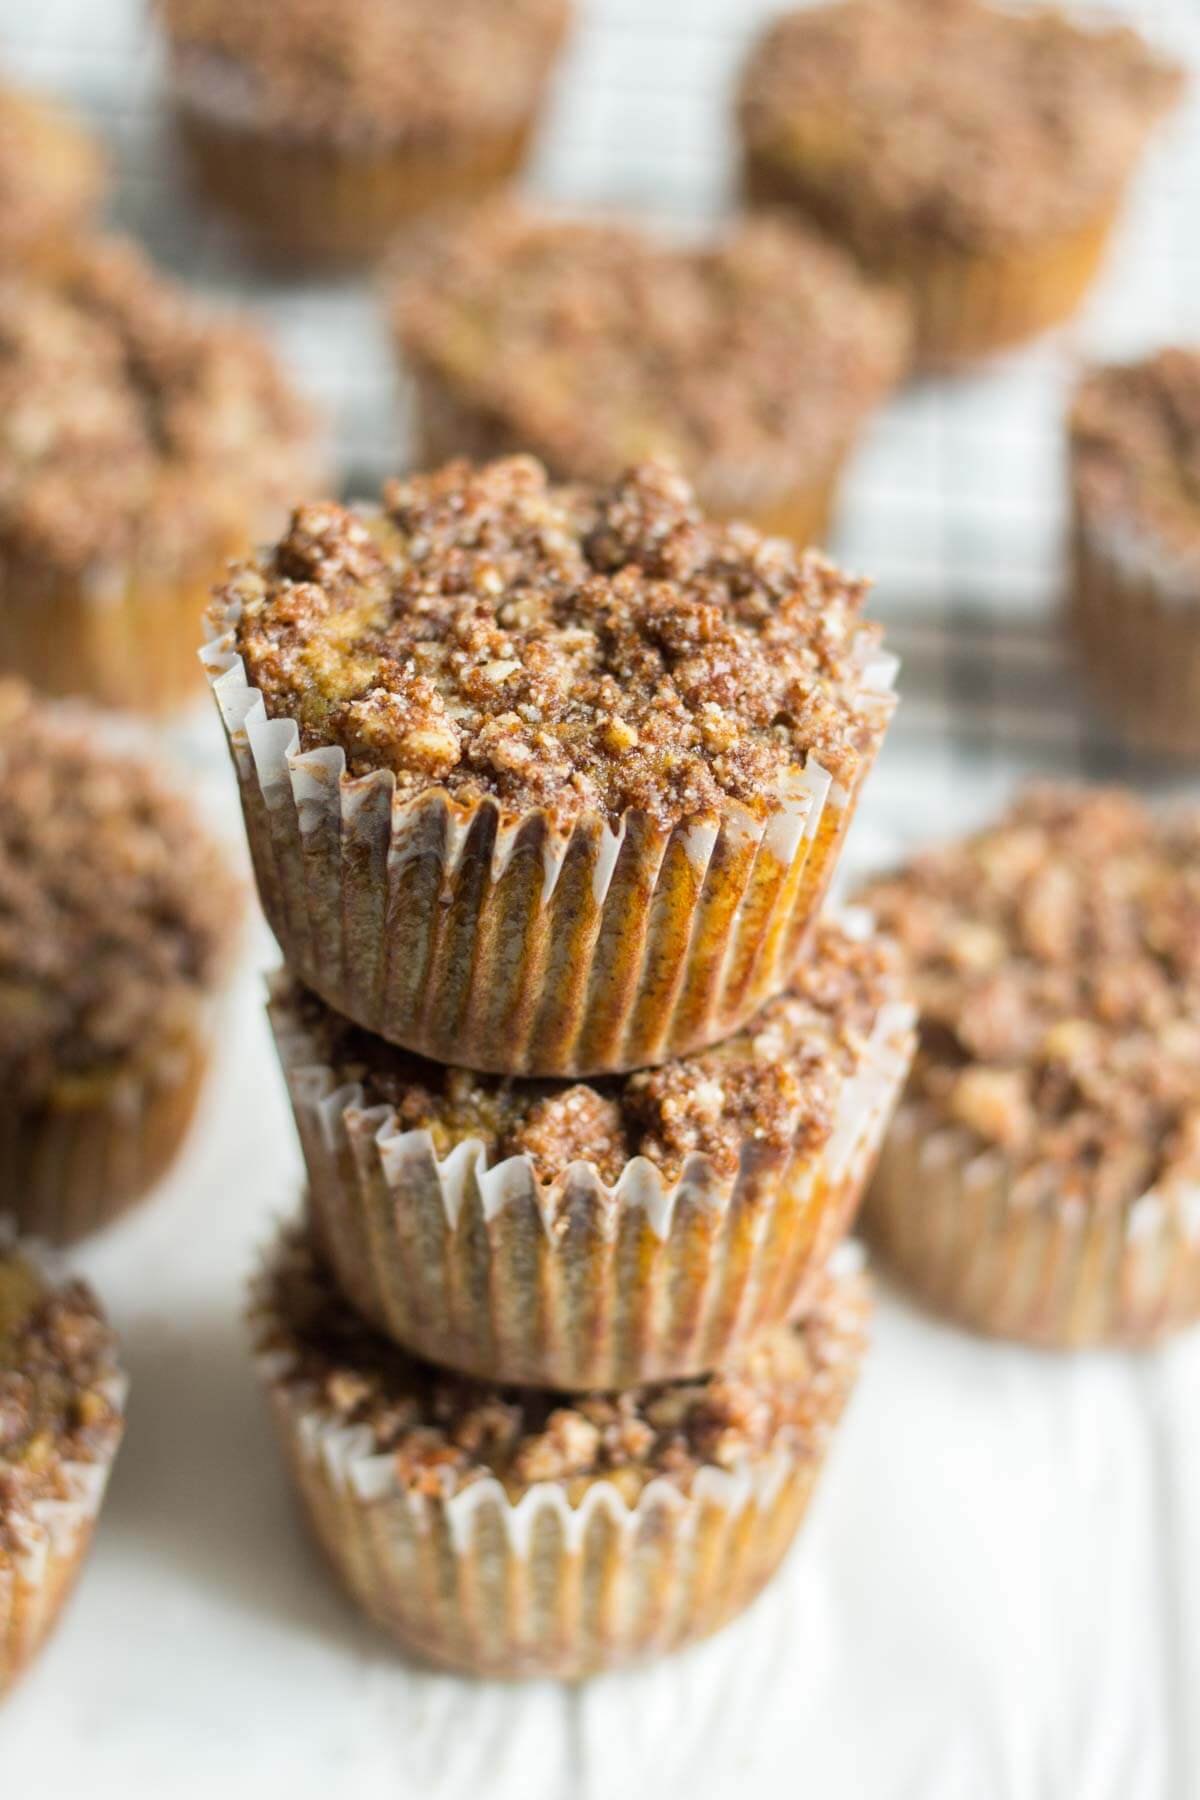 The best Easter recipe, these paleo cinnamon streusel carrot muffins have a layer of pecan and cinnamon topping piled on top. The carrot muffin base is filled with carrots and more cinnamon and sweetened with ripe bananas. This recipe is so moist and flavorful! You're friends and family won't even know it's paleo and gluten-free on Easter morning!